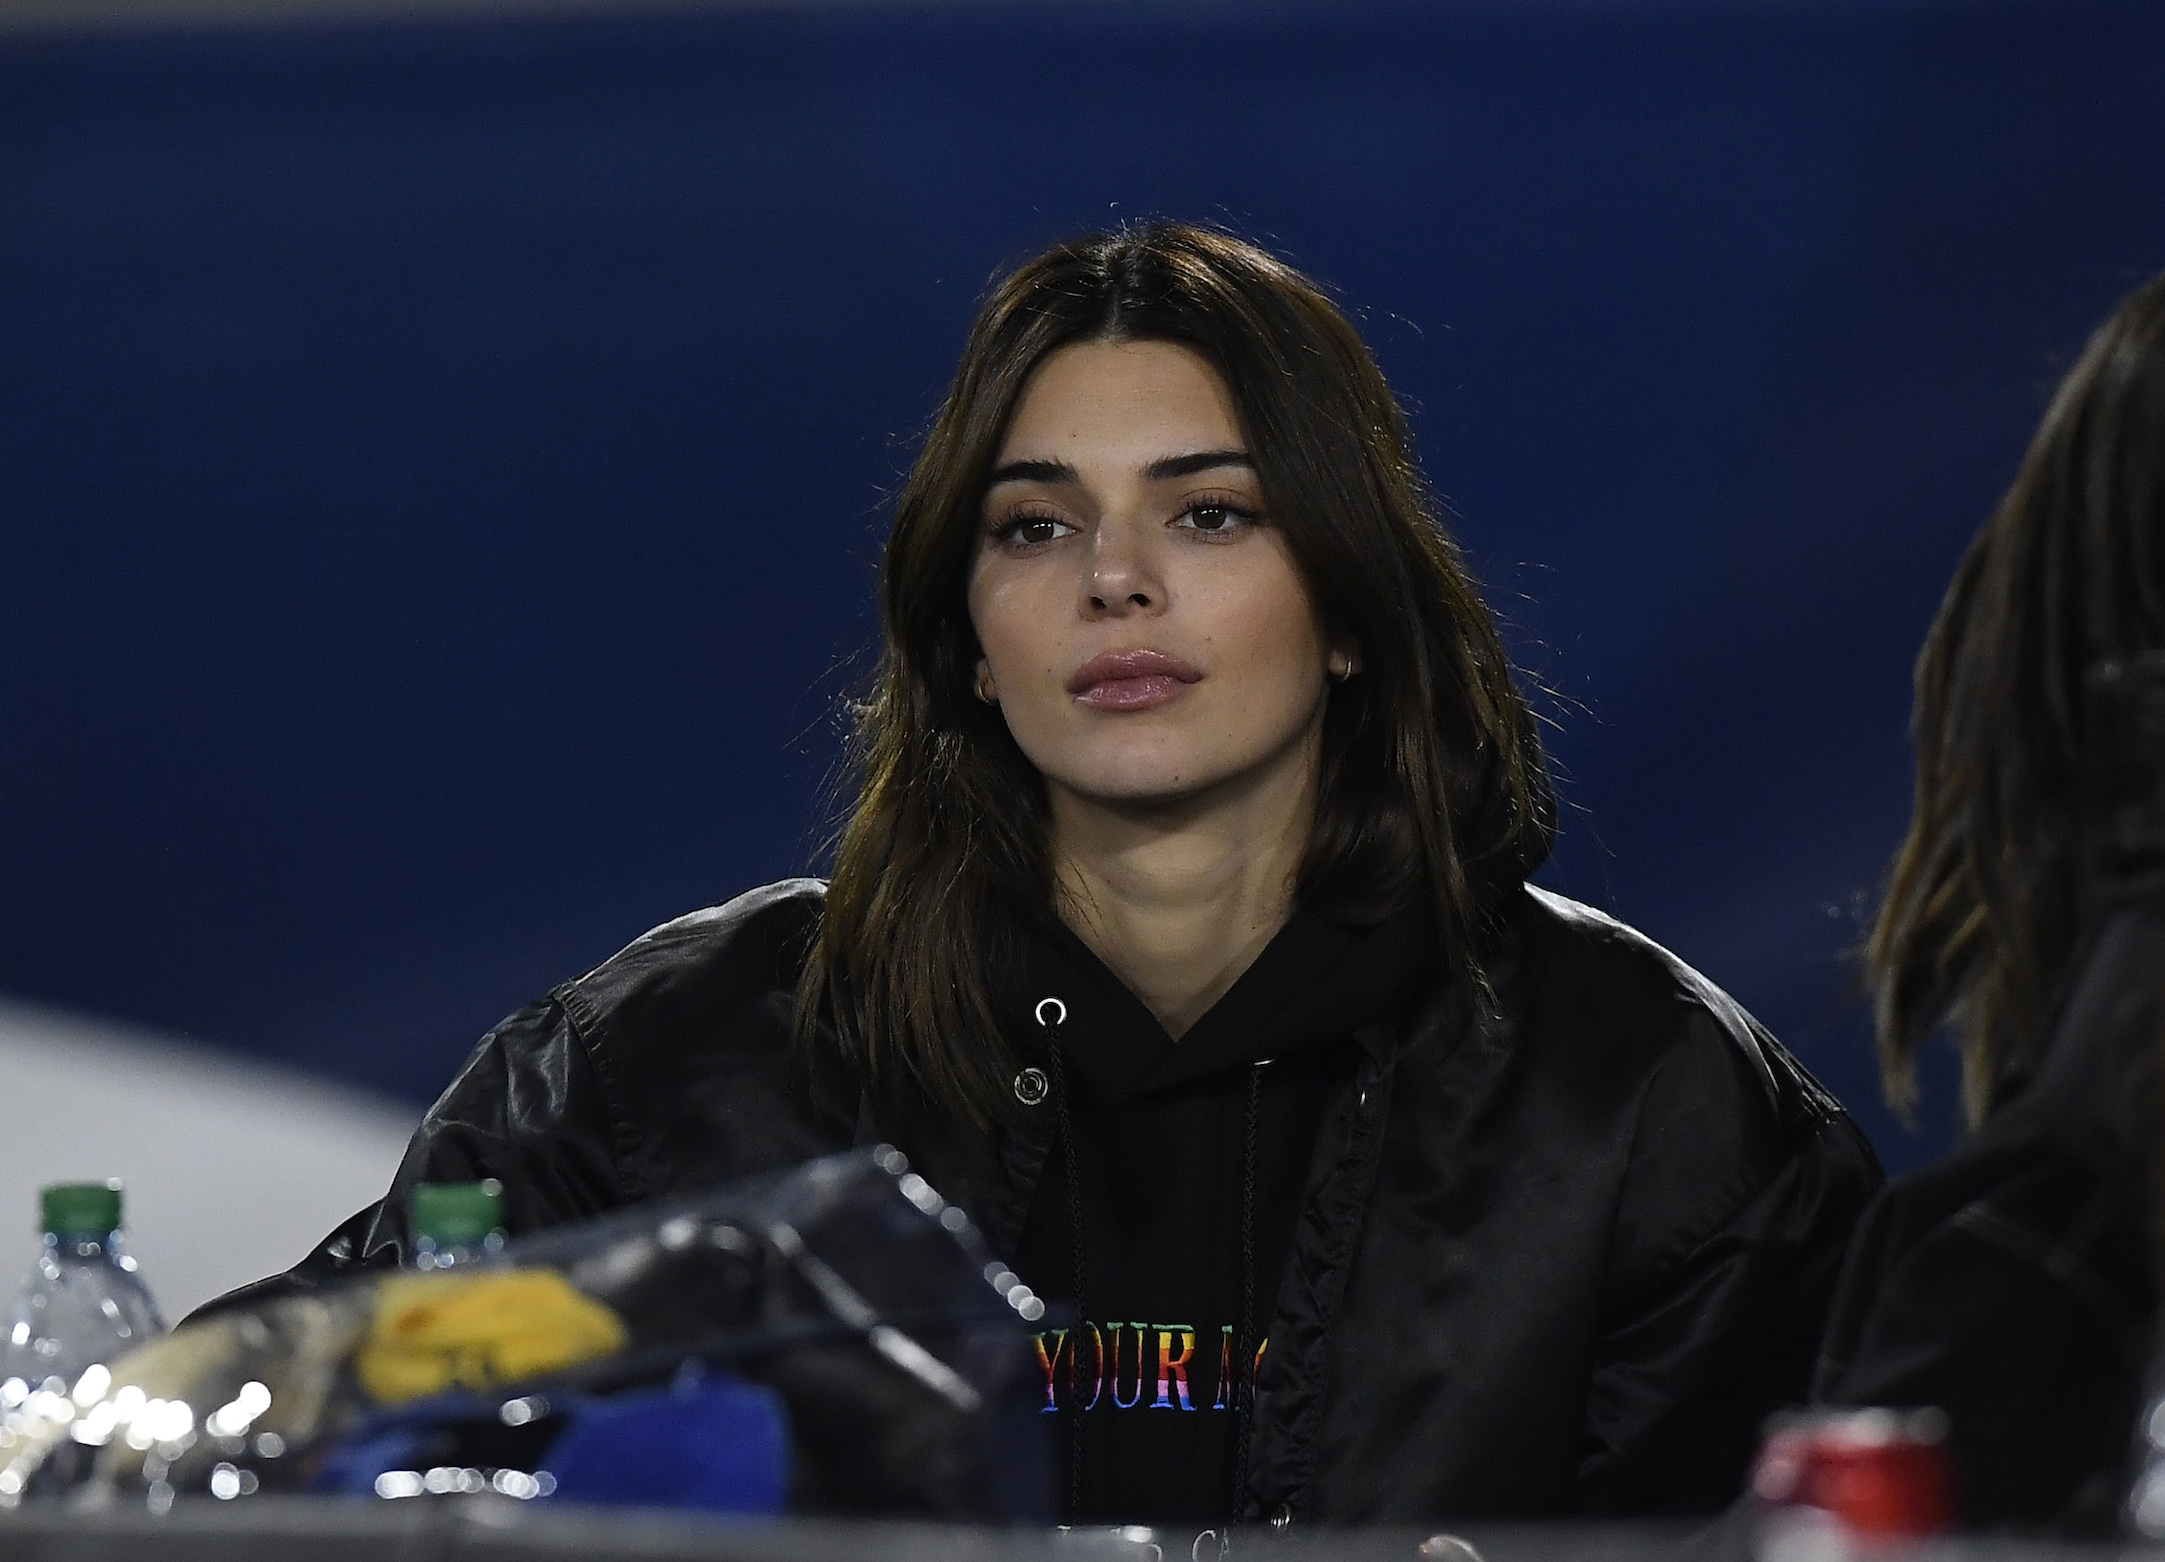 Kendall Jenner attends a football game 